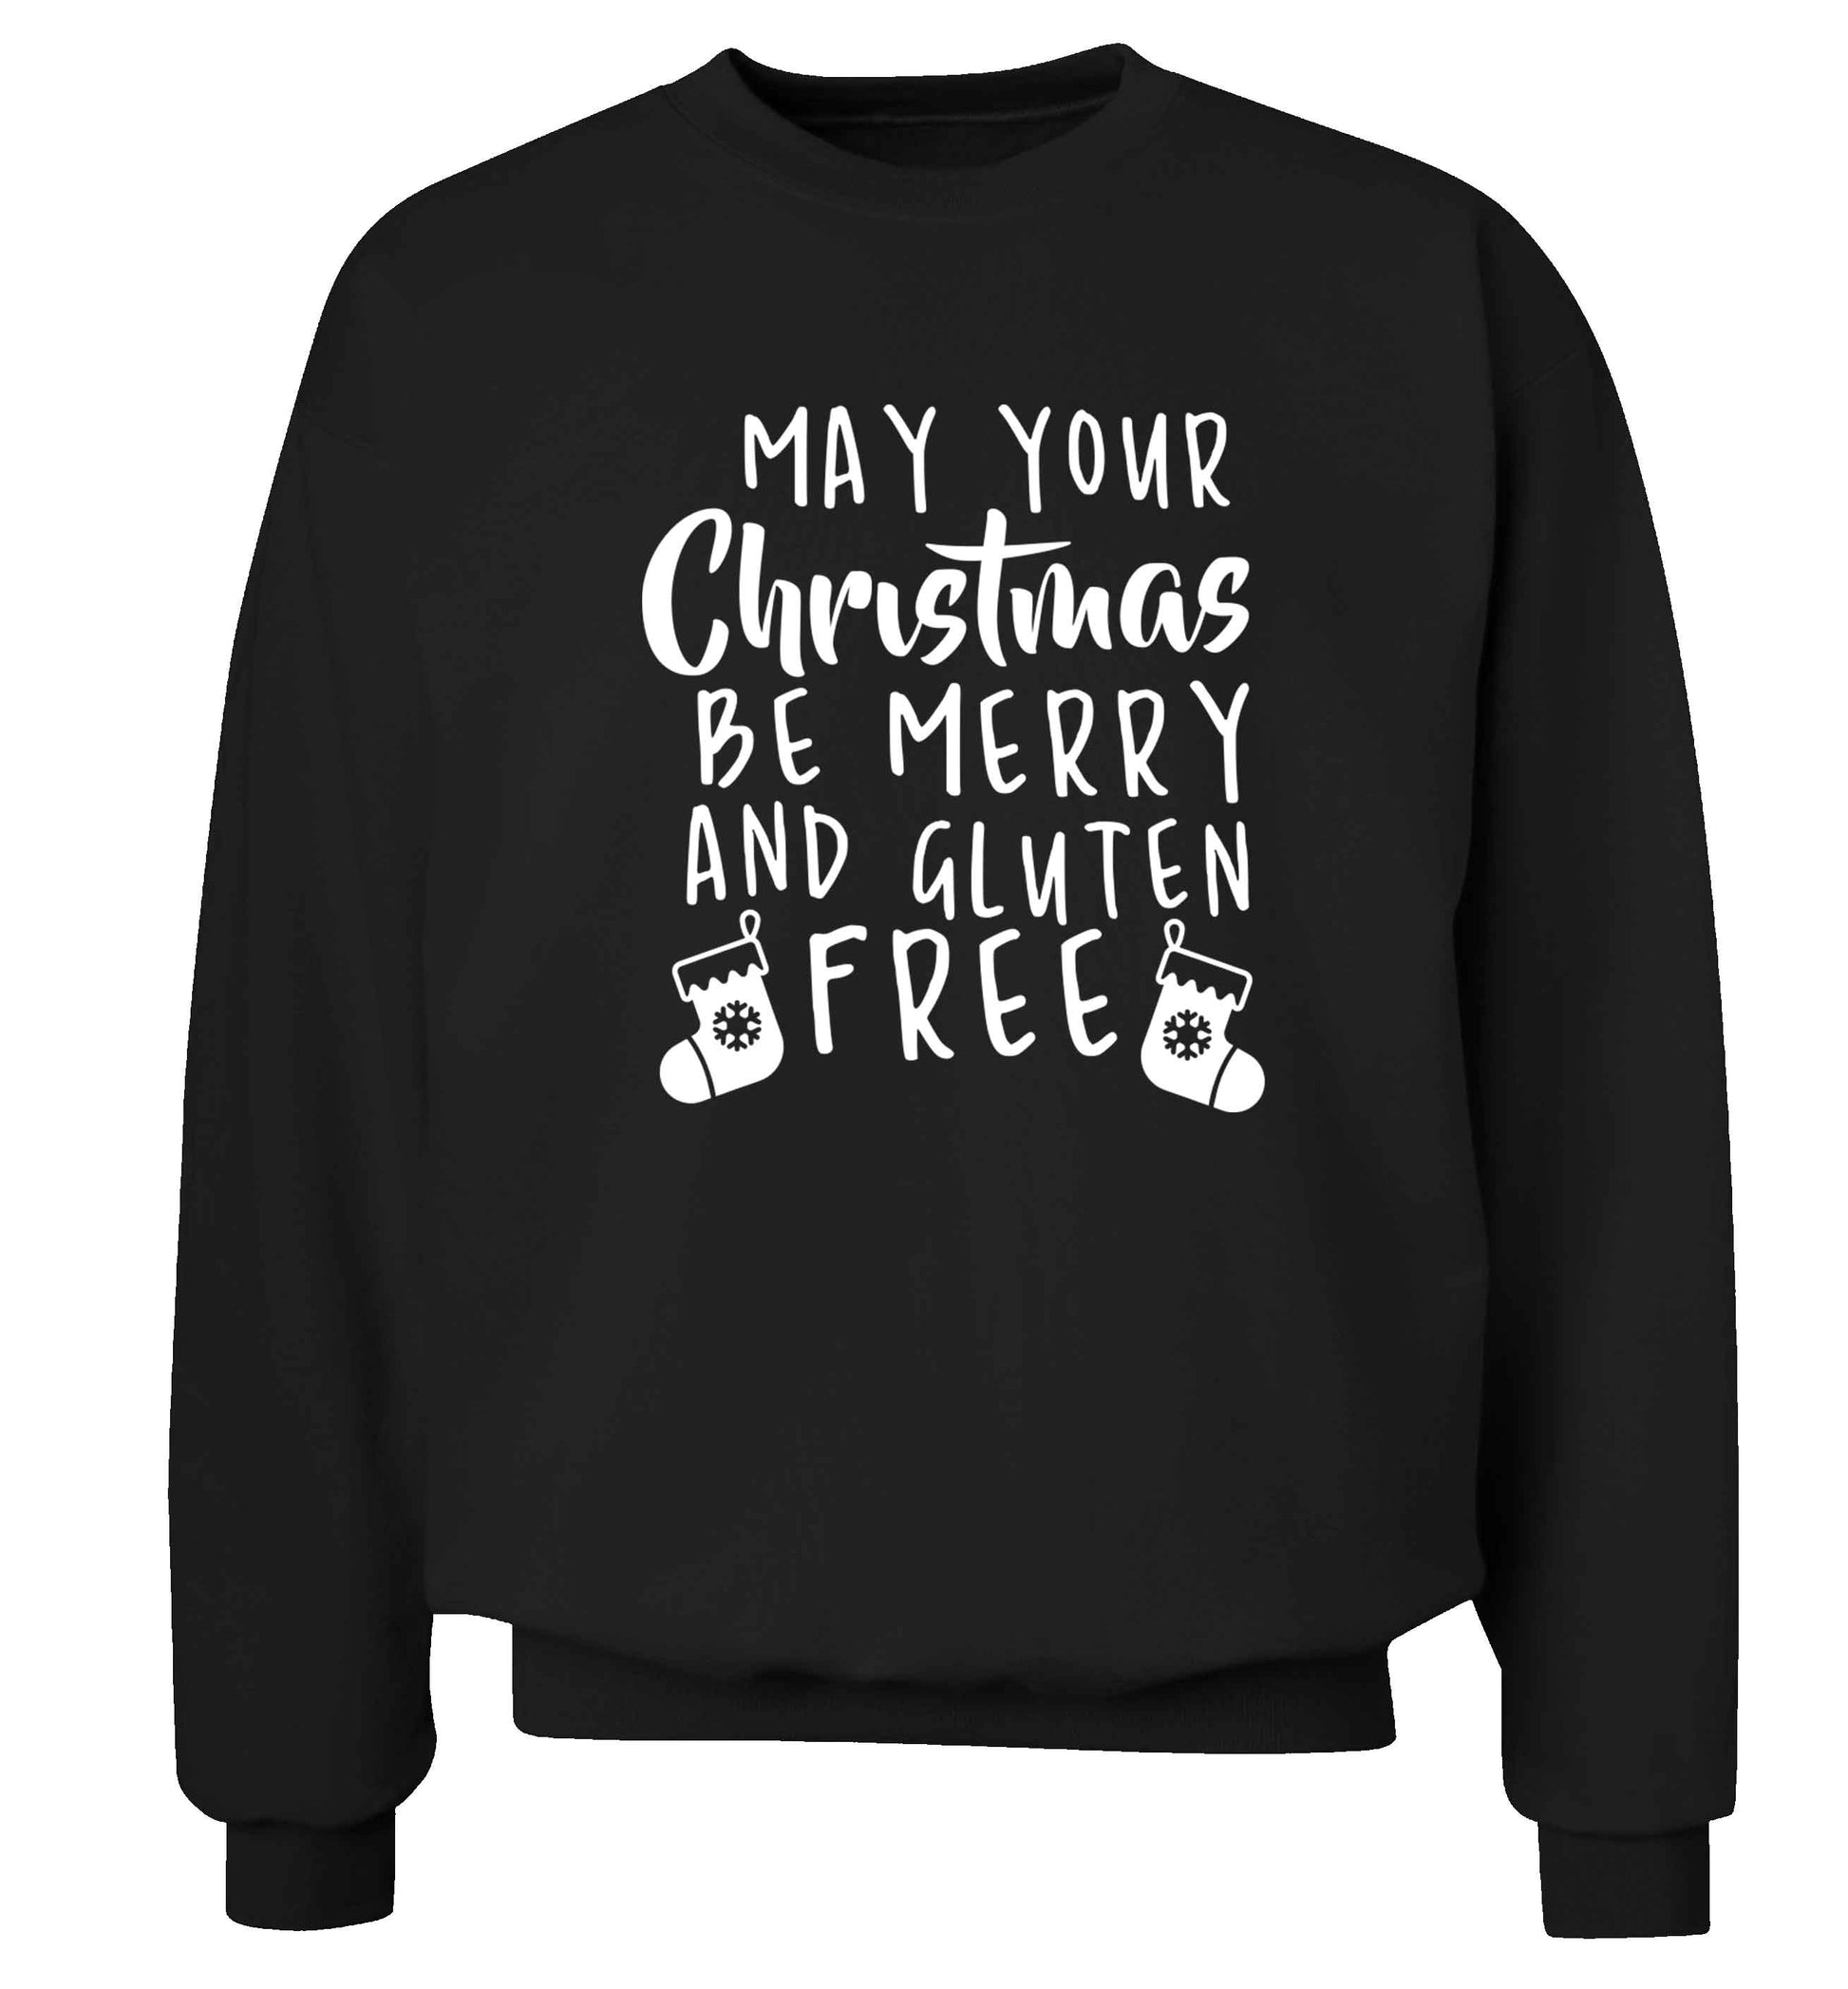 May your Christmas be merry and gluten free Adult's unisex black Sweater 2XL